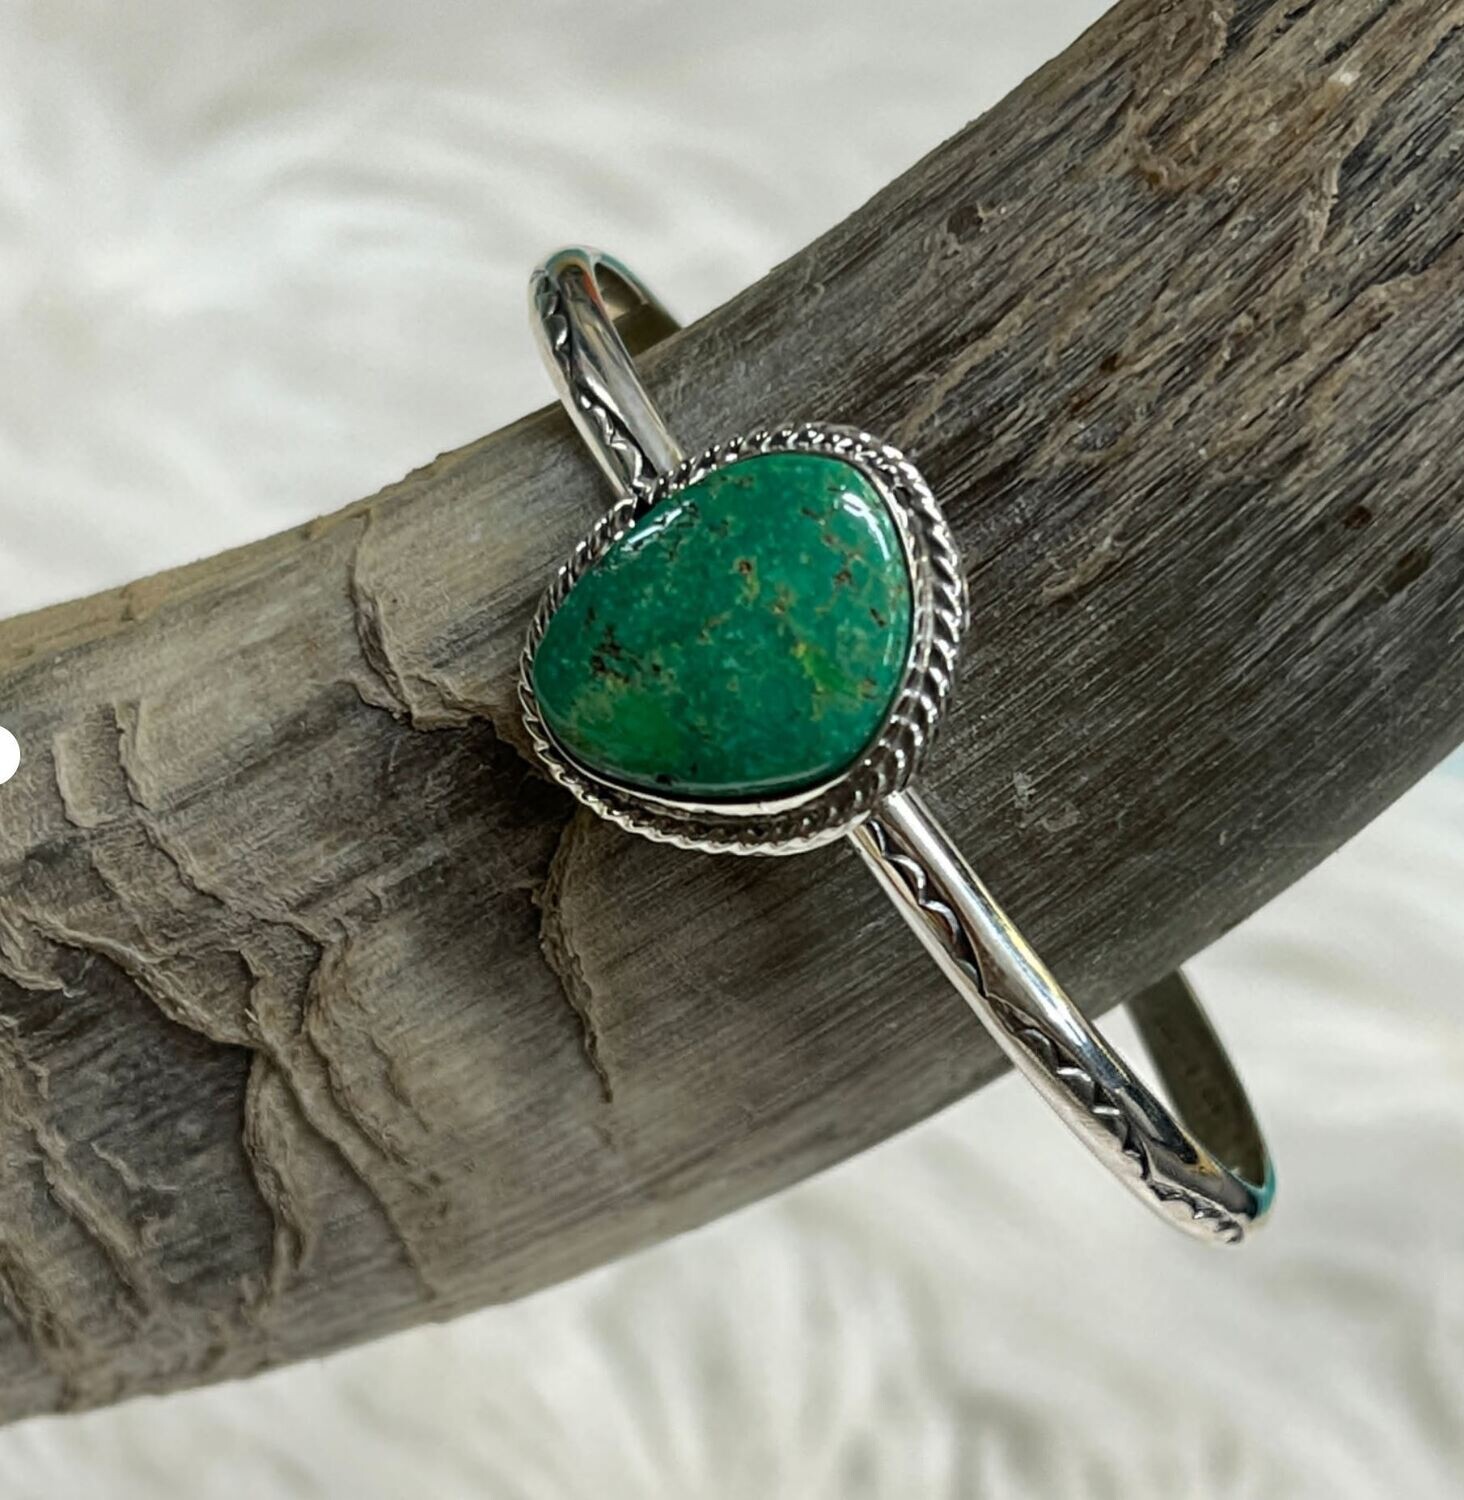 Navajo Sterling Silver Cuff with Turquoise Stone by Suzanna Johnson - 4